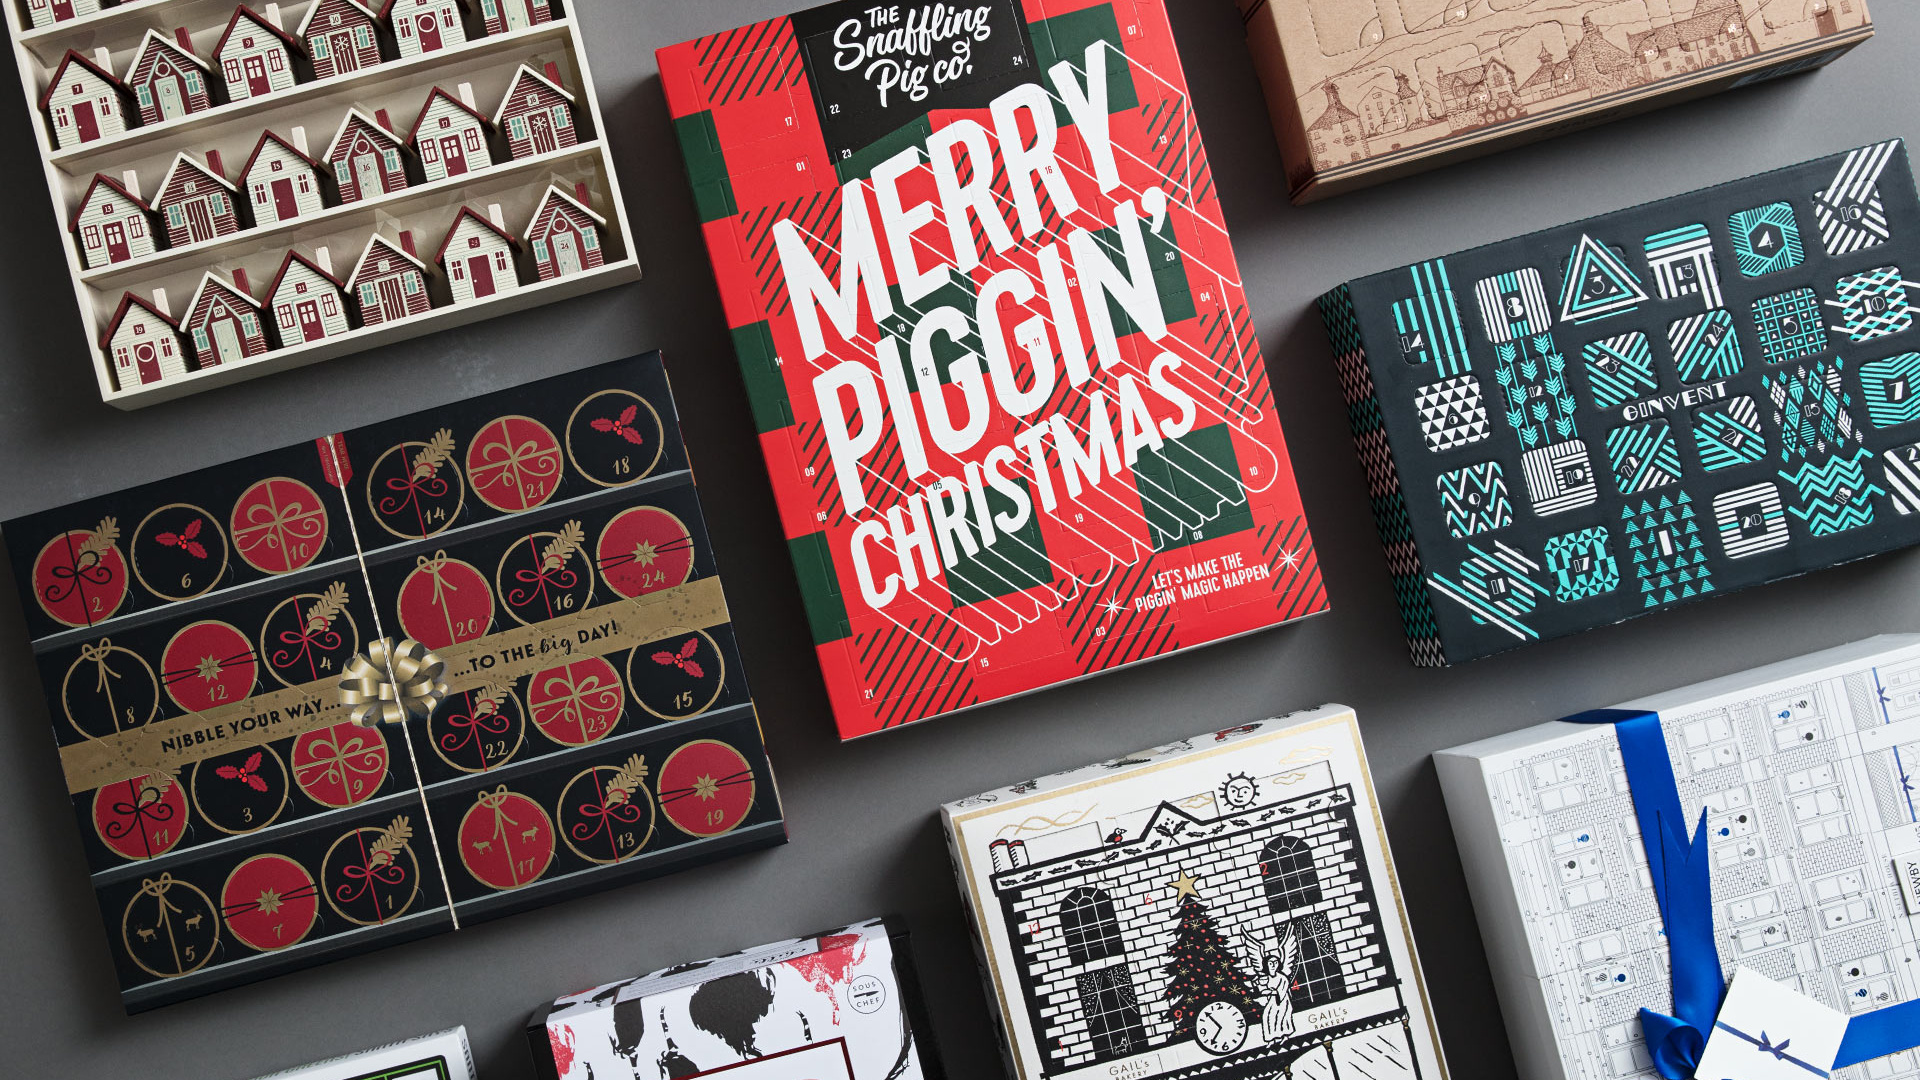 Best food and drink Advent calendars for adults Foodism